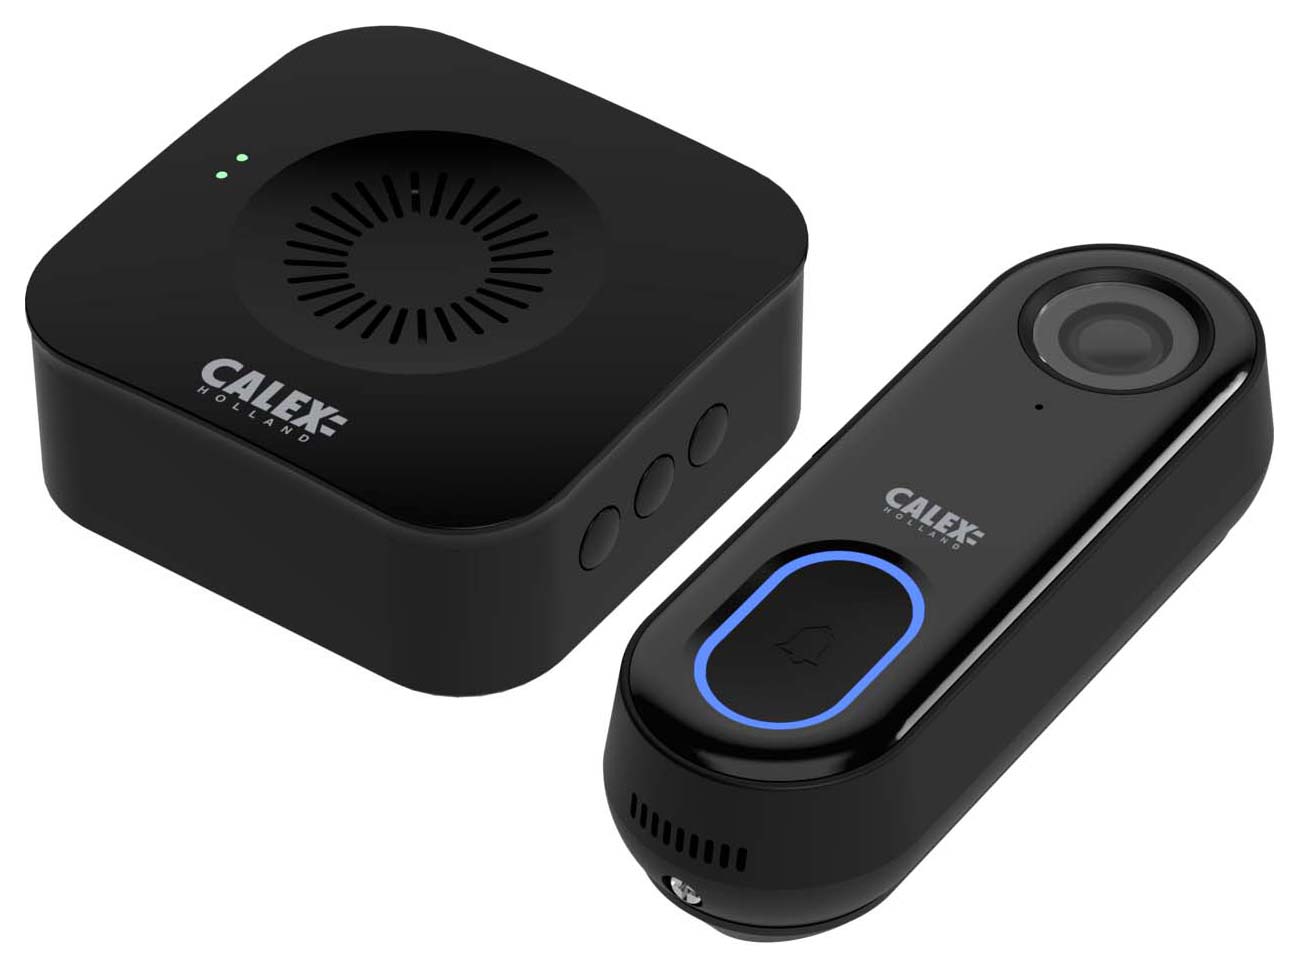 Calex Smart Home Video Doorbell and Chime